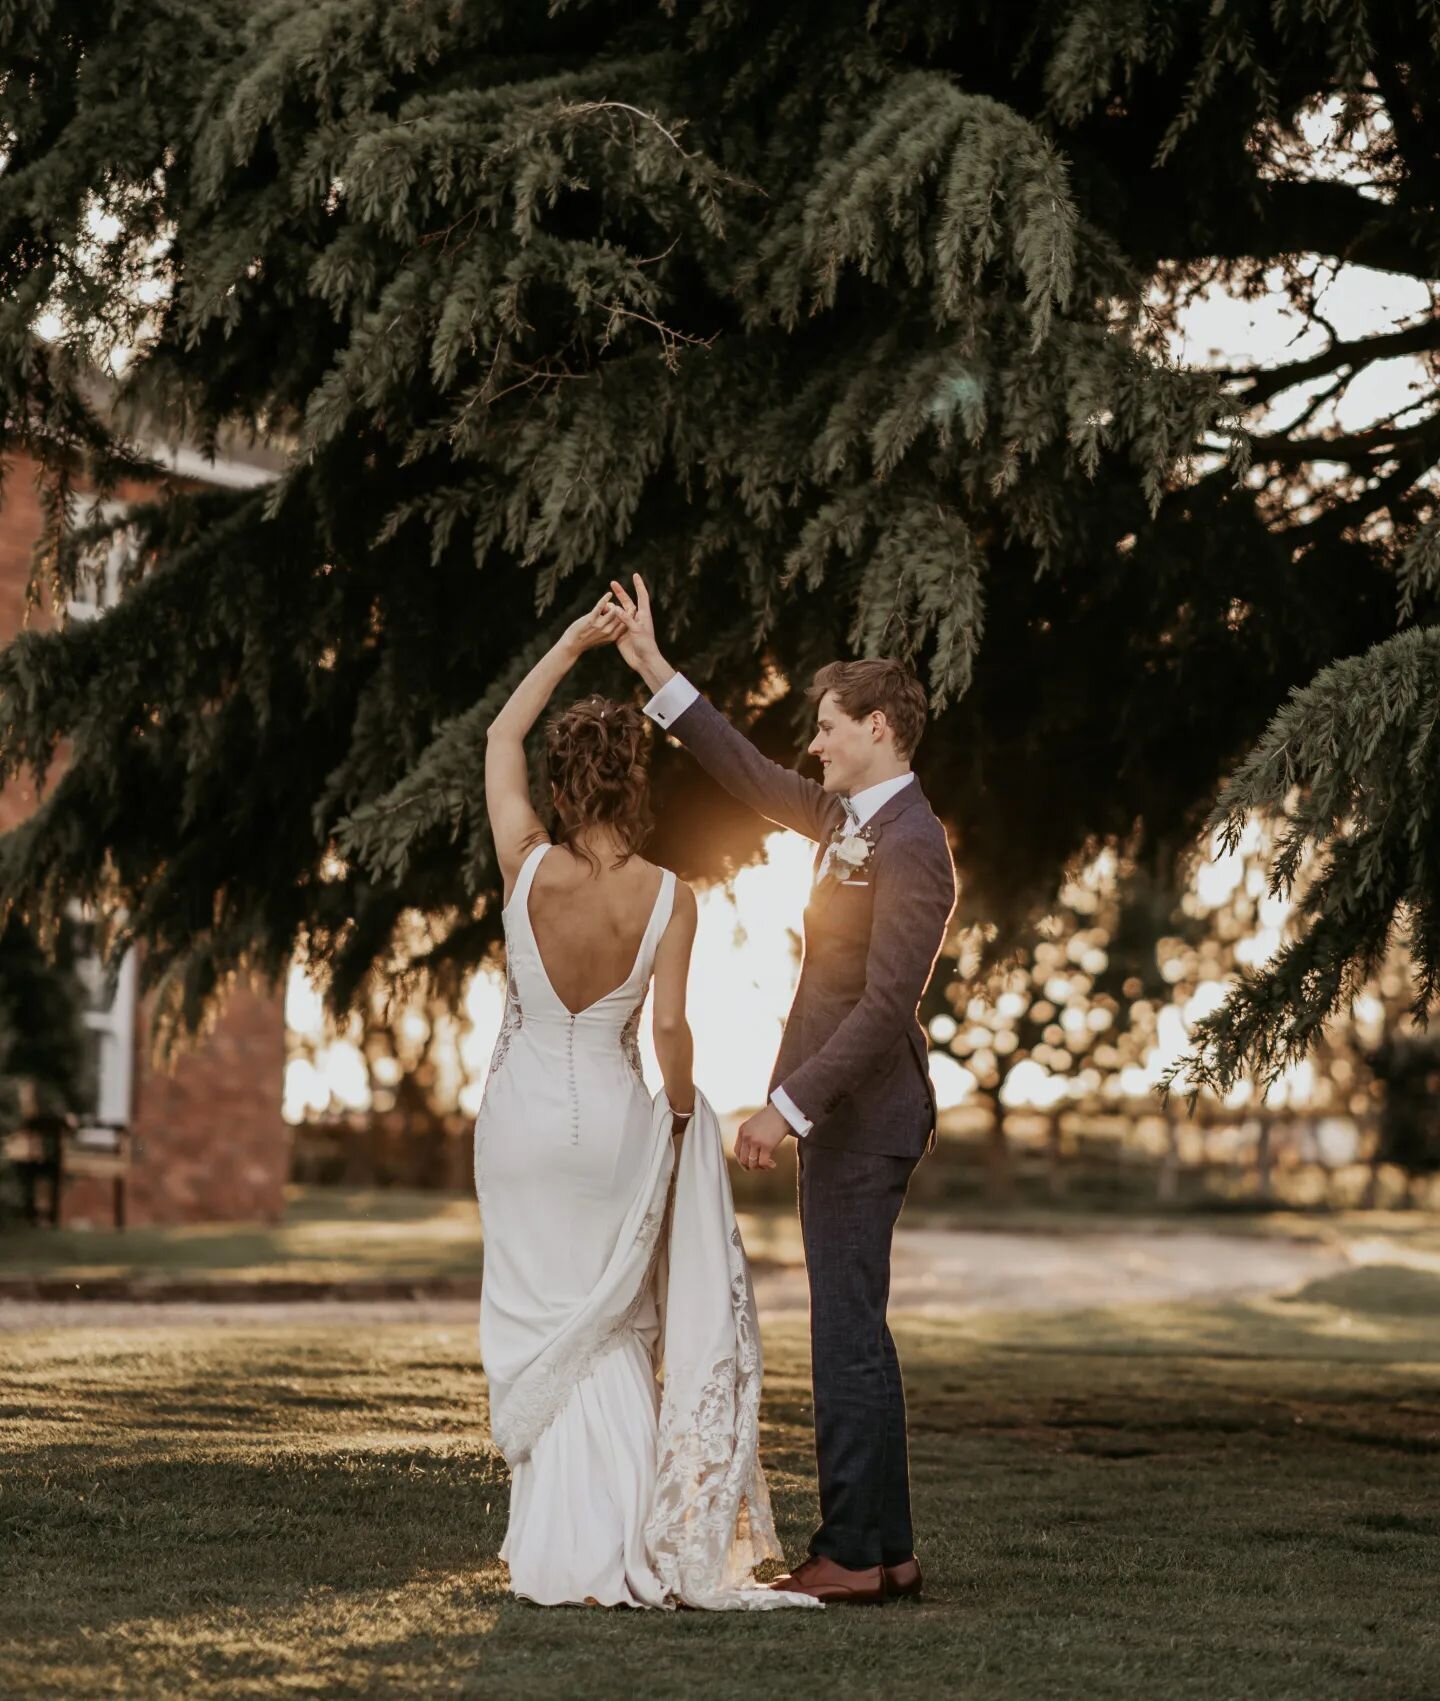 Oh golden hour evening shoots are just the best - Claire and Jochem bringing all the summer sunset vibes at the ever beautiful @swancar_farm_country_house